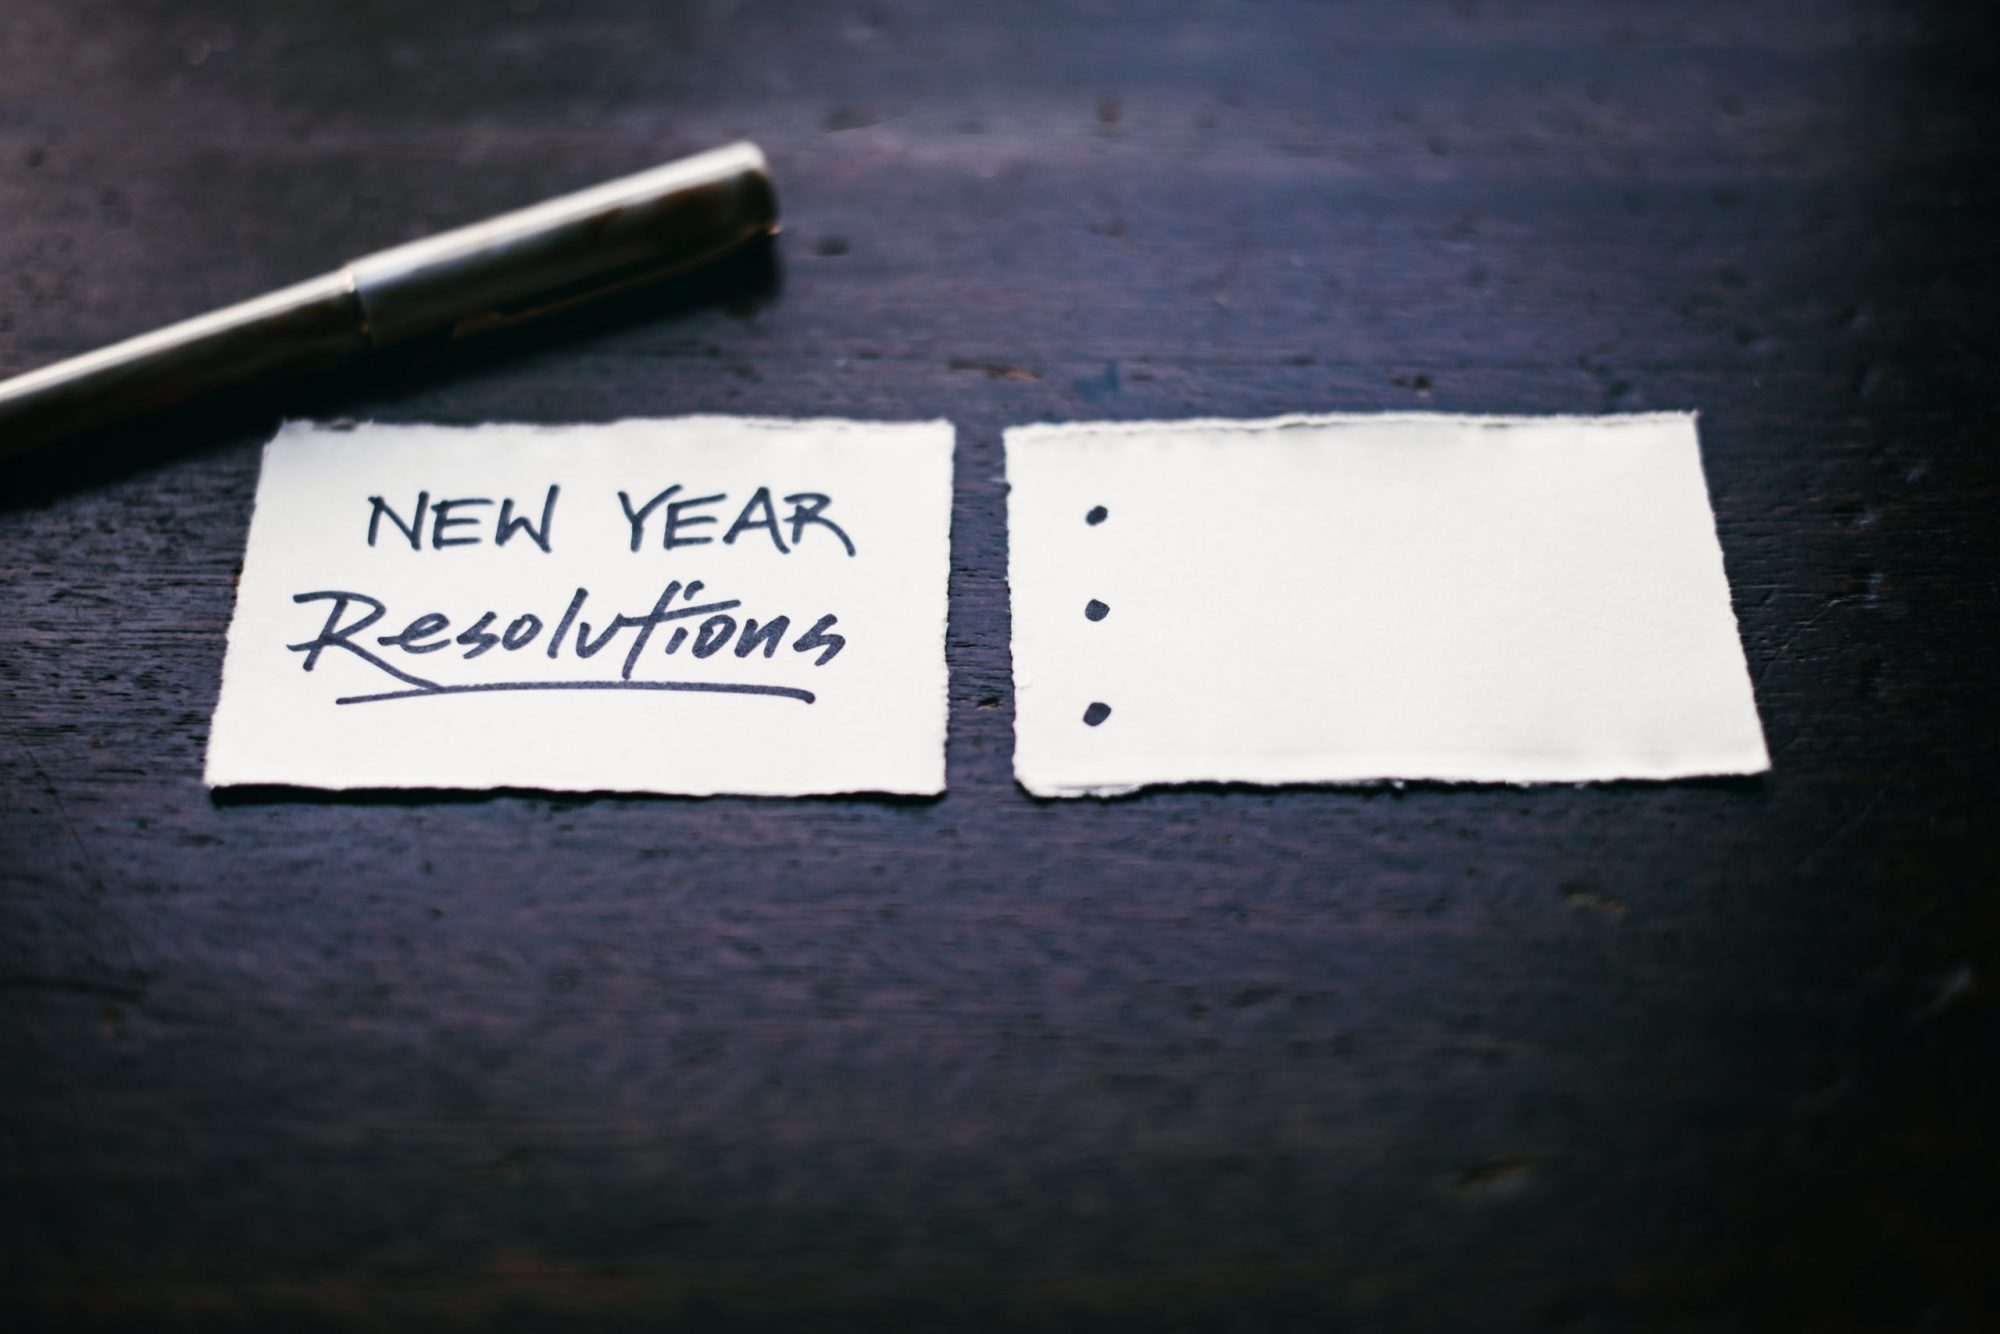 Resolutions & Intentions for the New Year